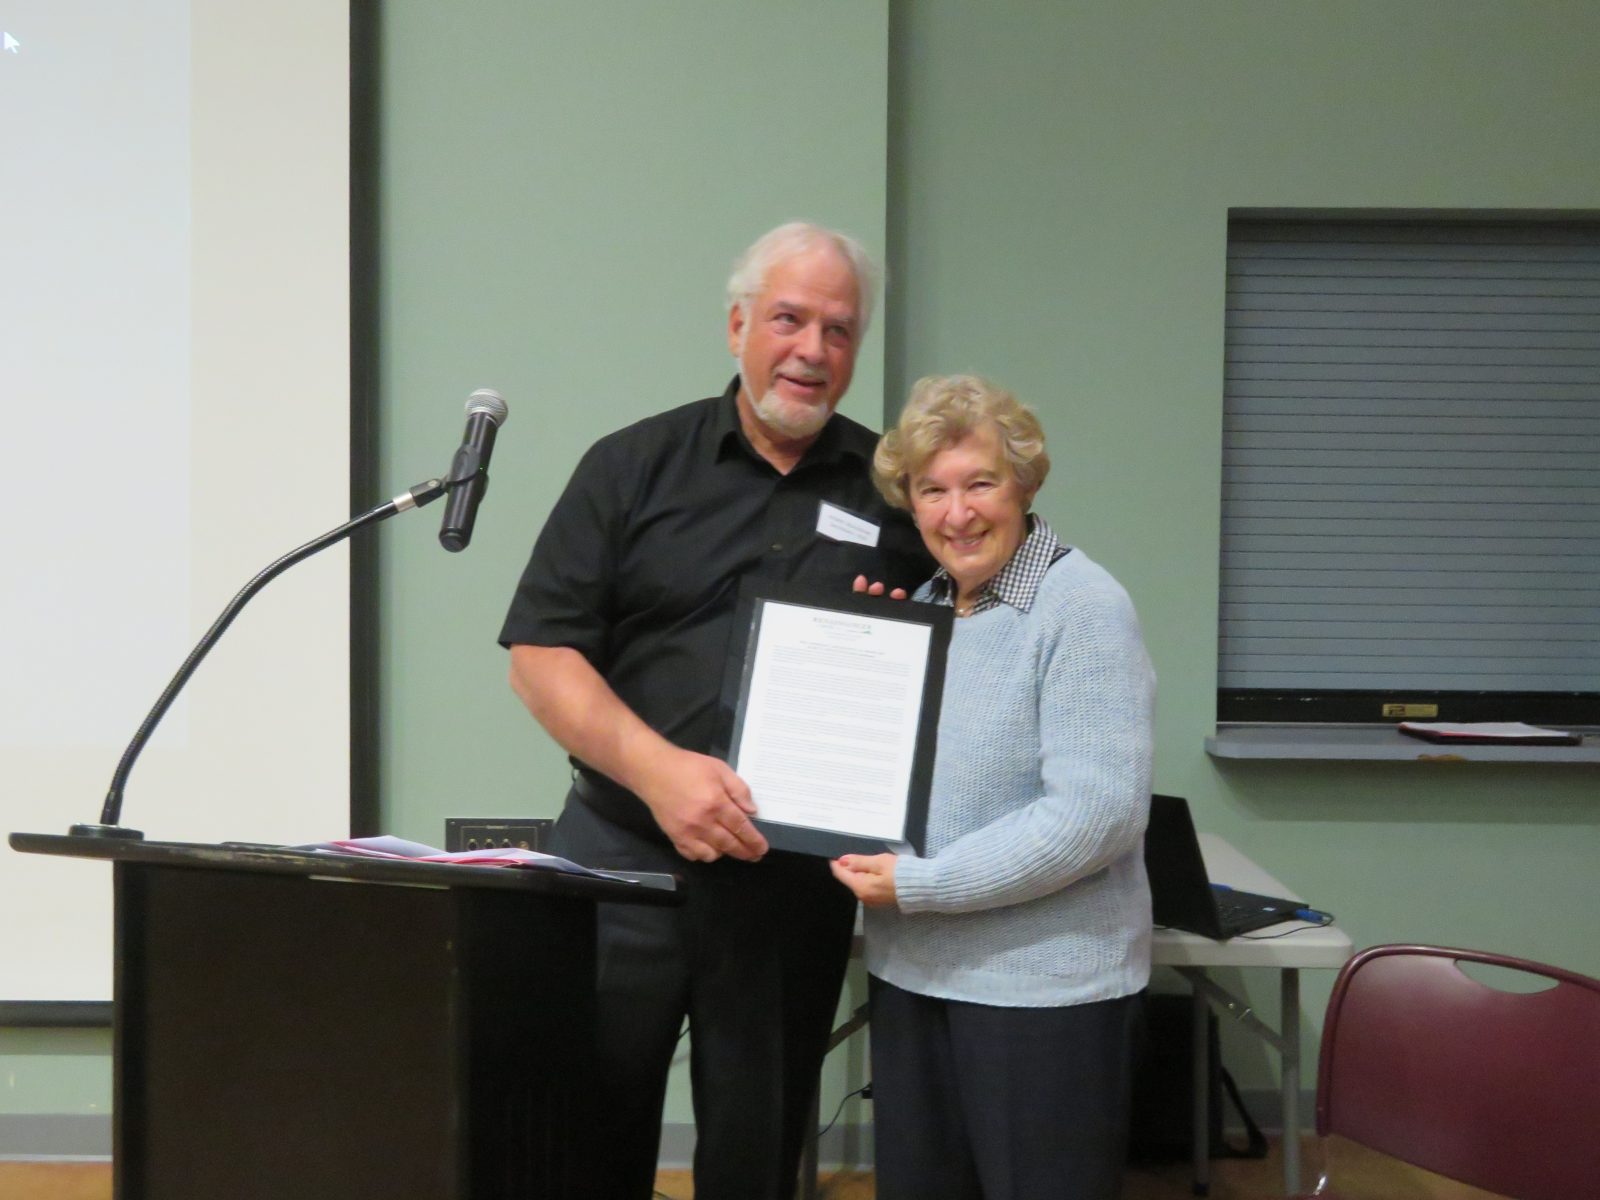 Renaissance Lac-Brome recognizes outstanding members at AGM